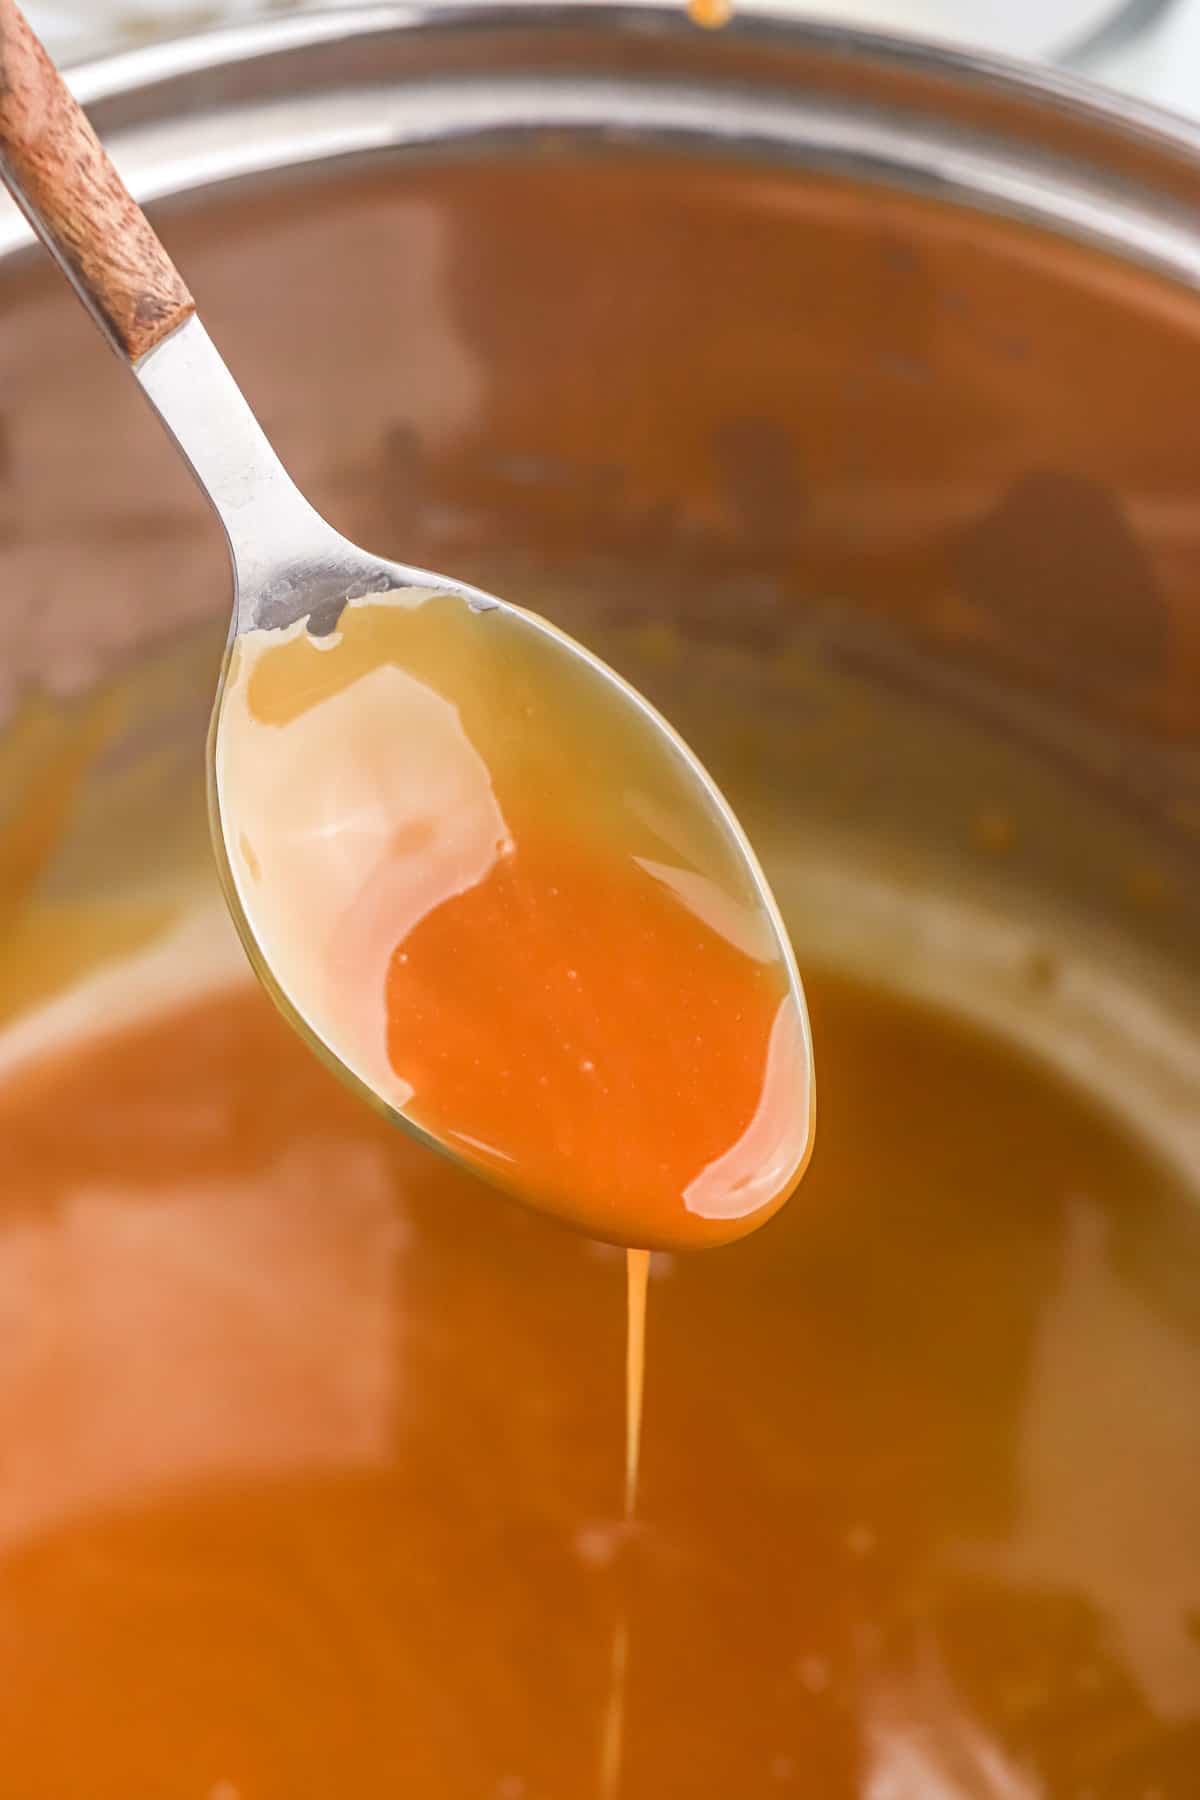 A spoon with caramel sauce dripping back into the pot.